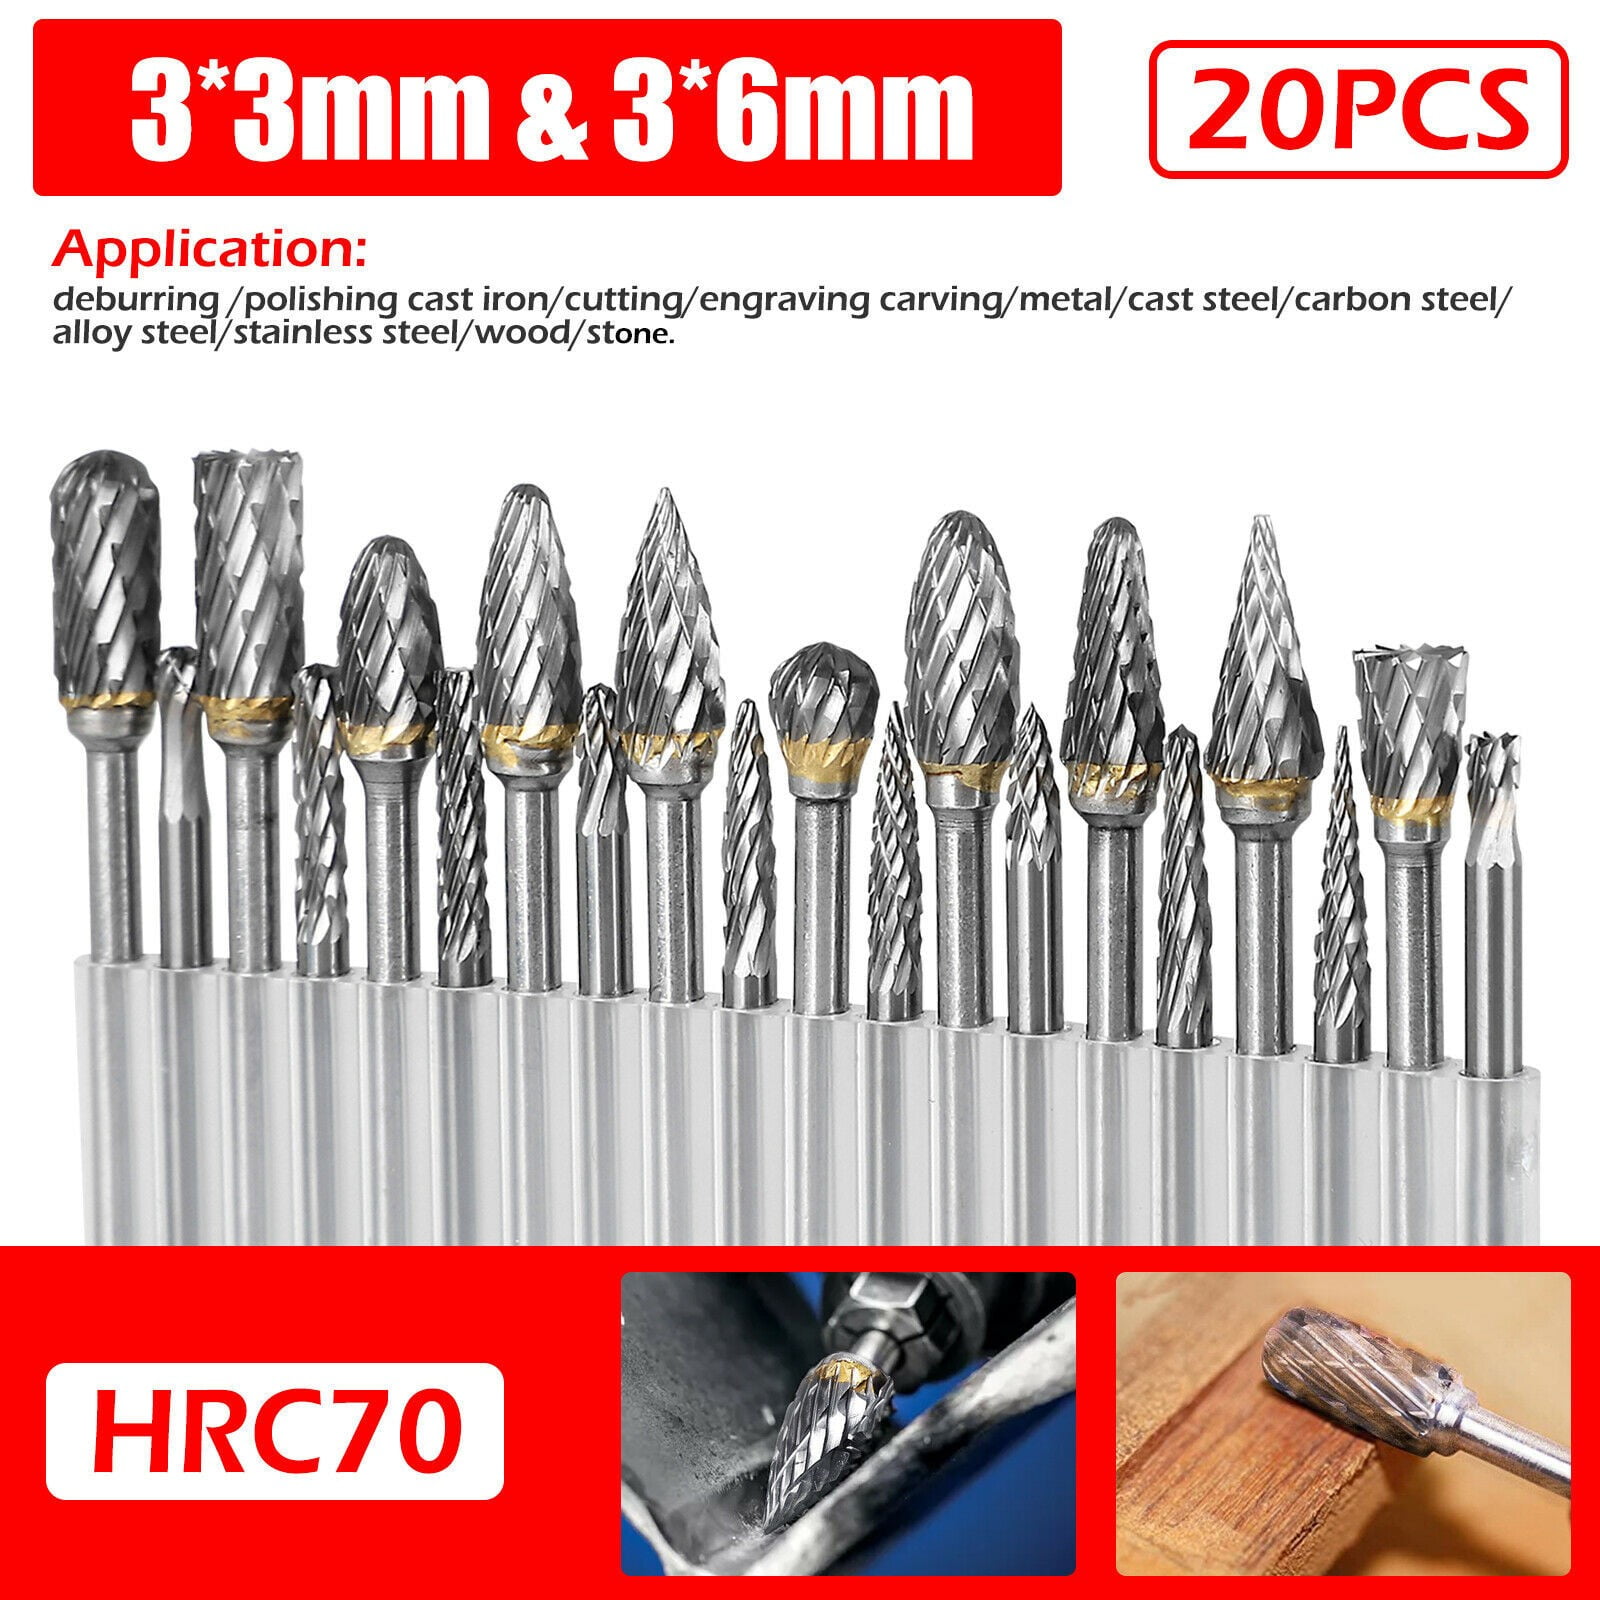 20X HSS Carbide Burr Set Rotary Drill Bits Die Grinder Carving Engraving Tools 